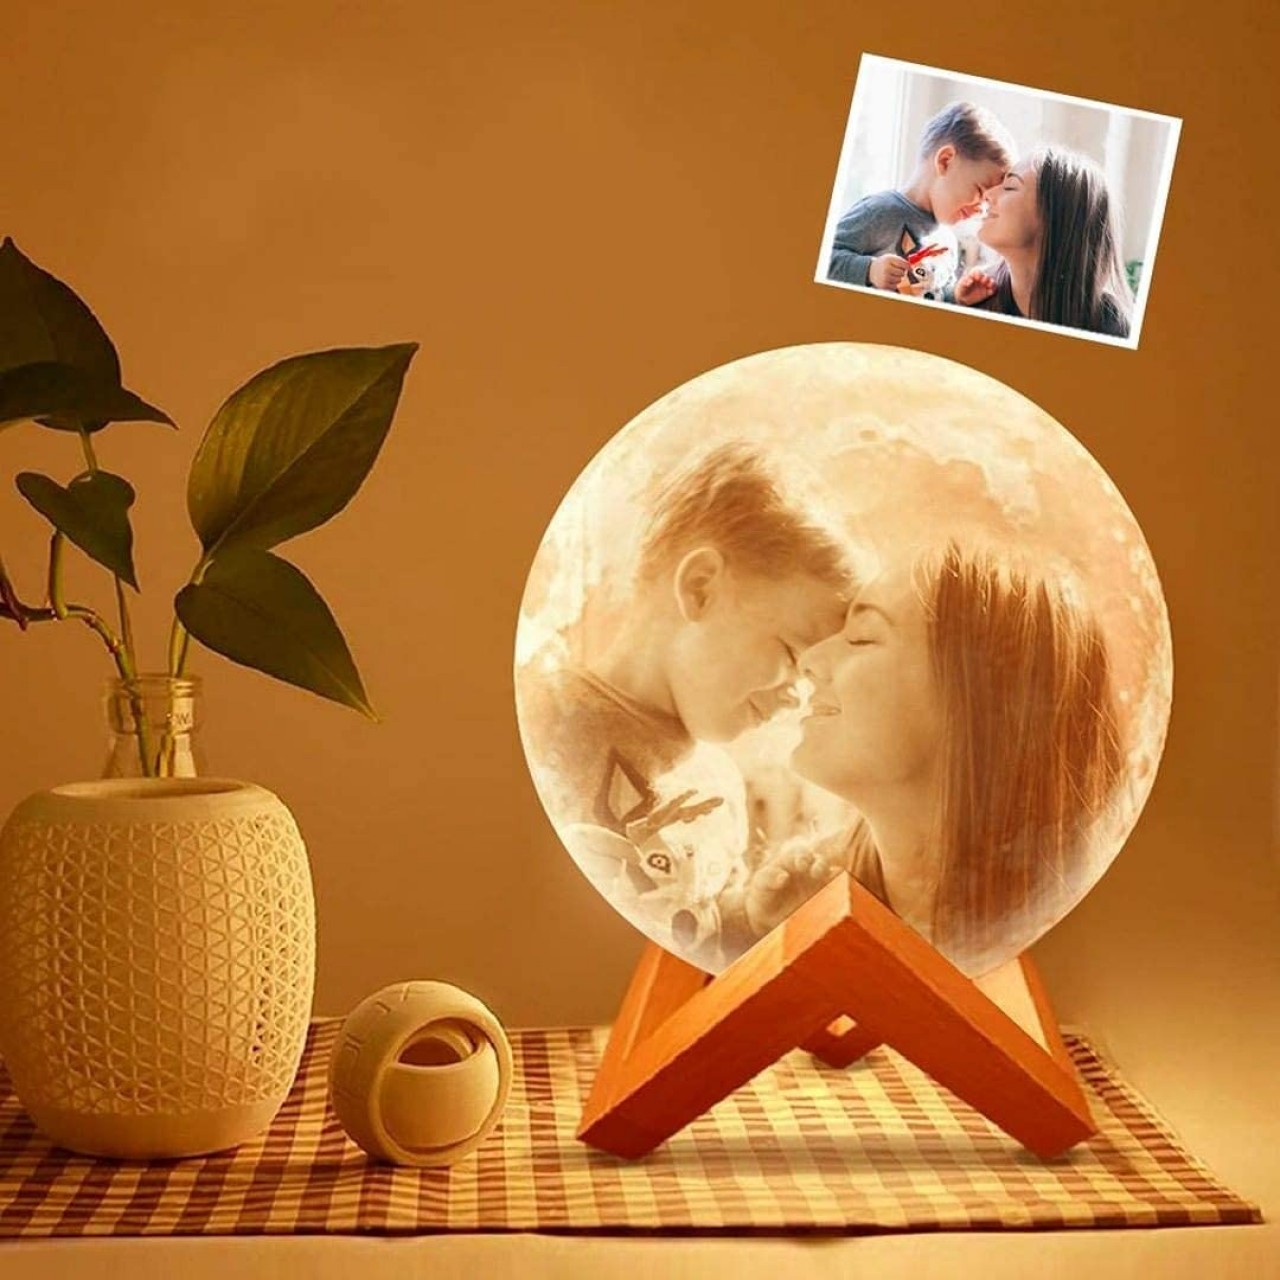 Personalized 16 Colors 3D Moon LED Lamp With Remote